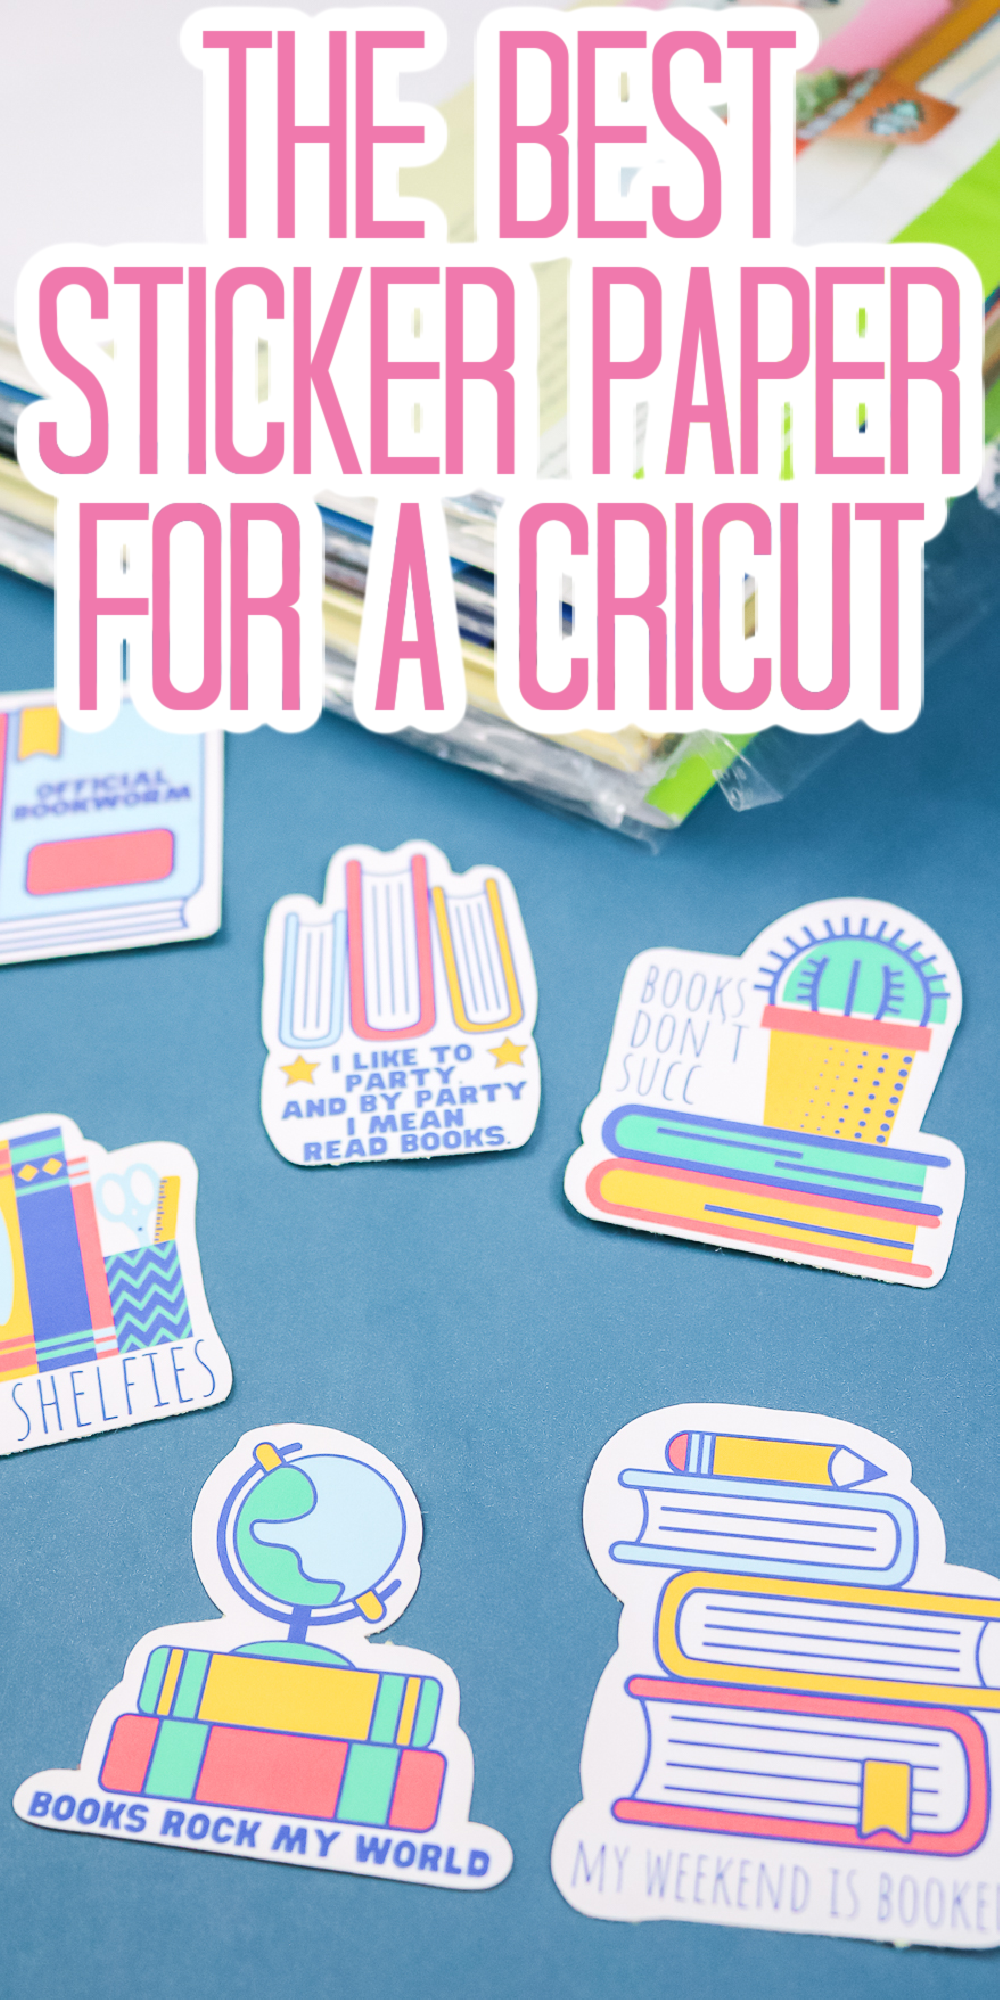 The Best Sticker Paper for a Cricut Patabook Home Improvements